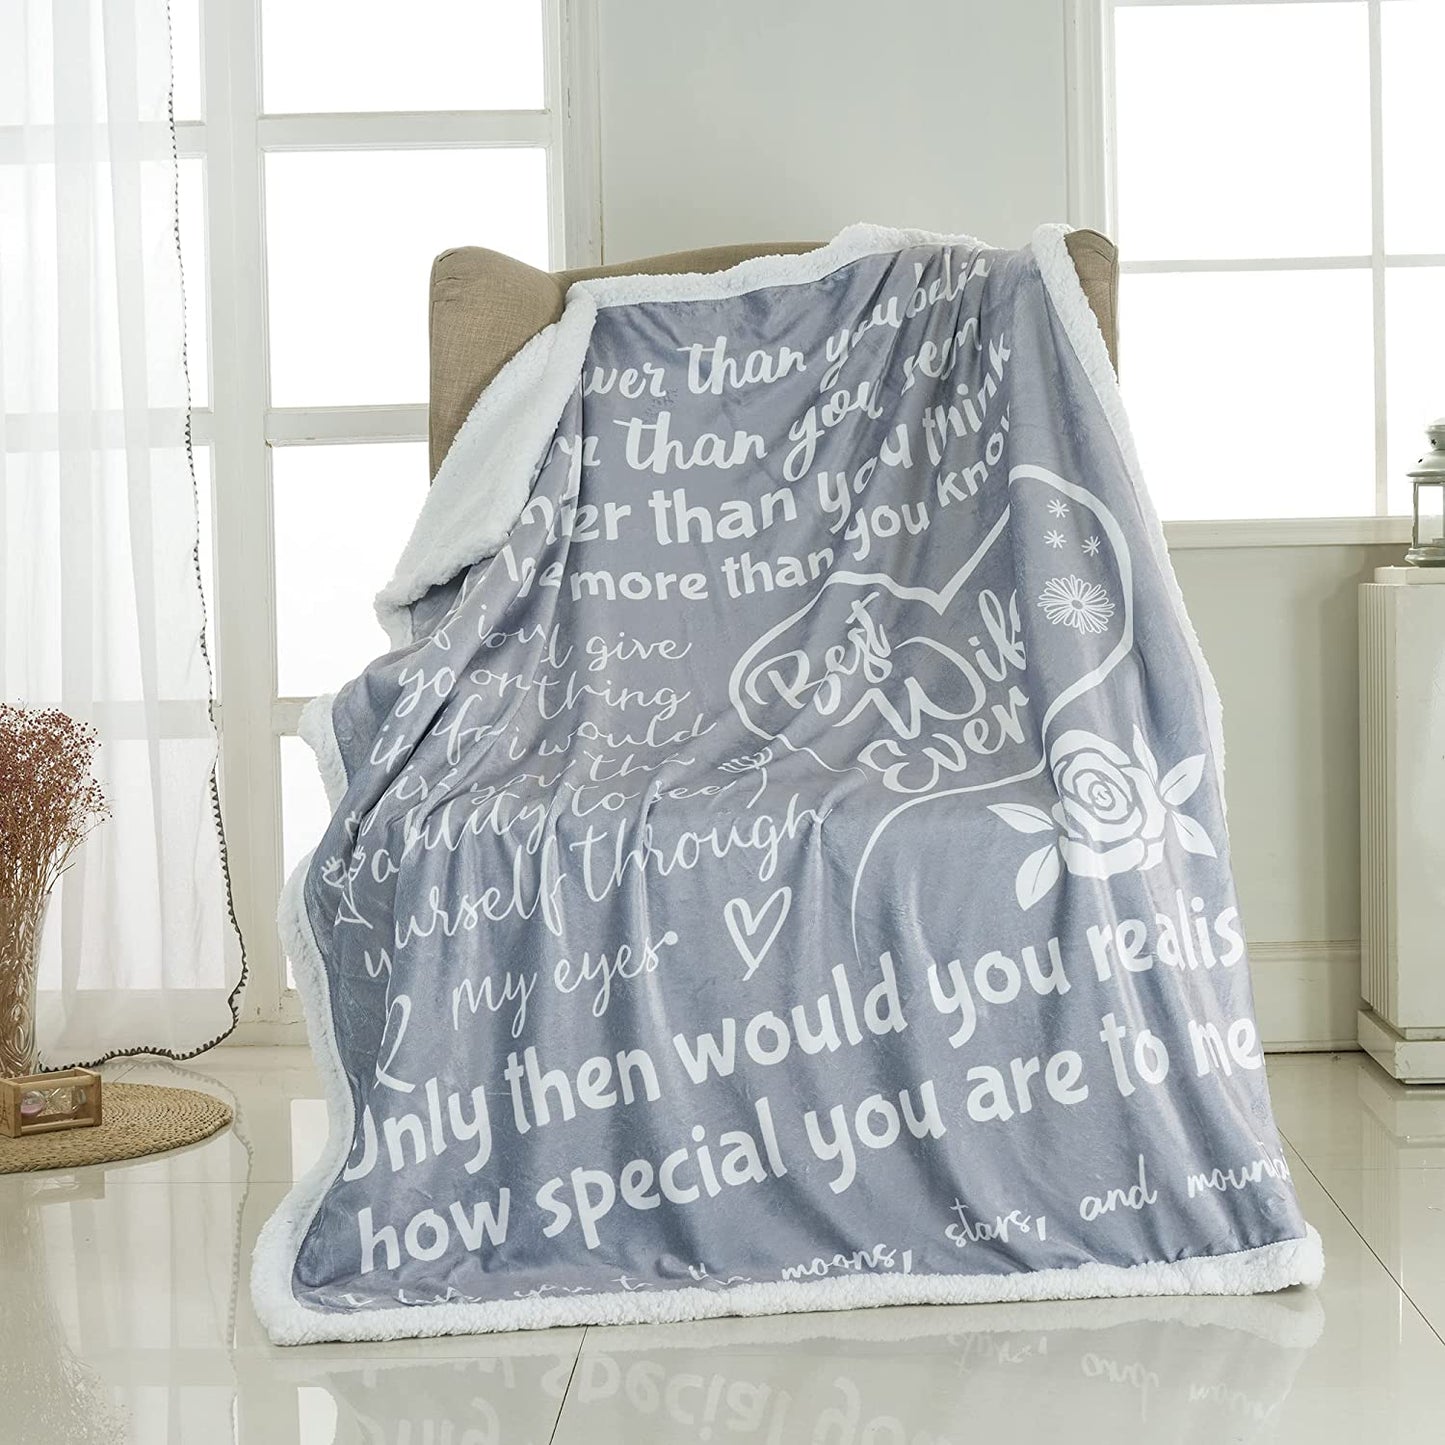 Wife Happy Anniversary Blanket with printed Loving Words